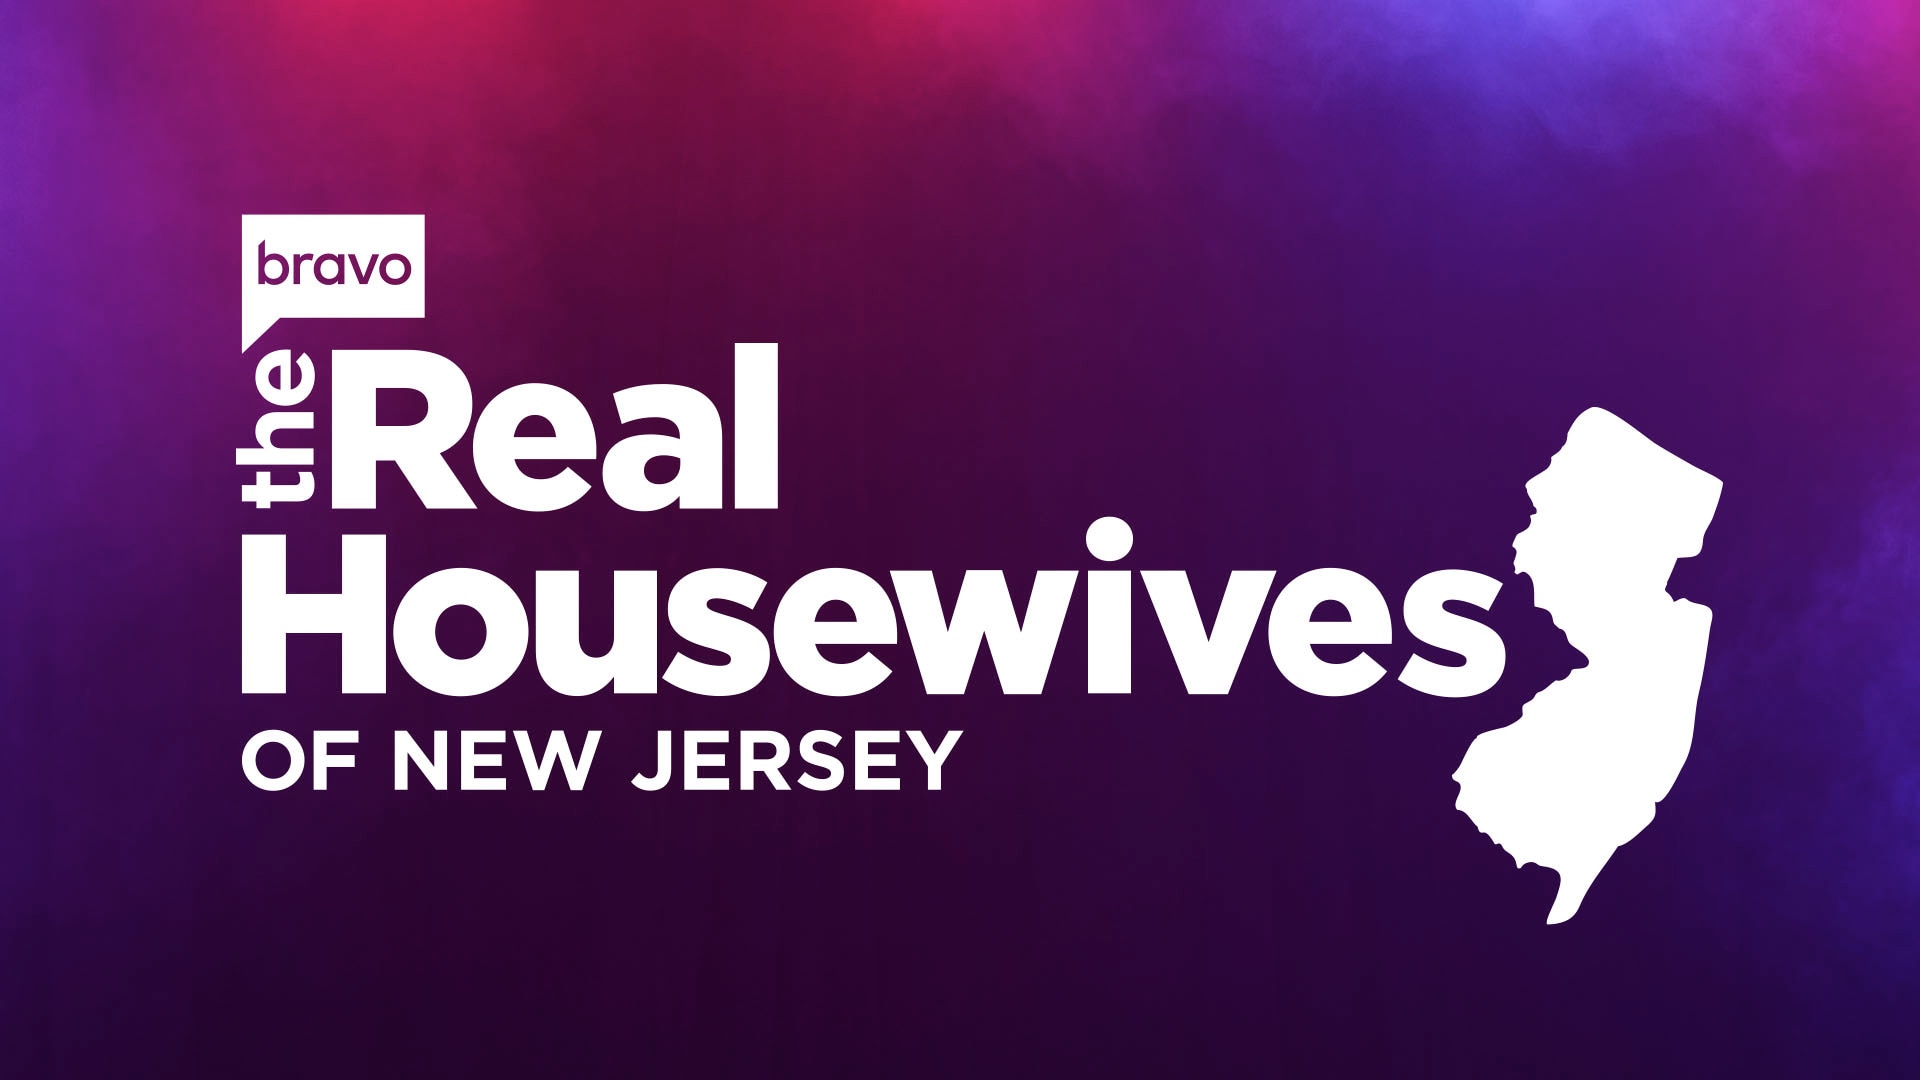 The Real Housewives of New Jersey photo